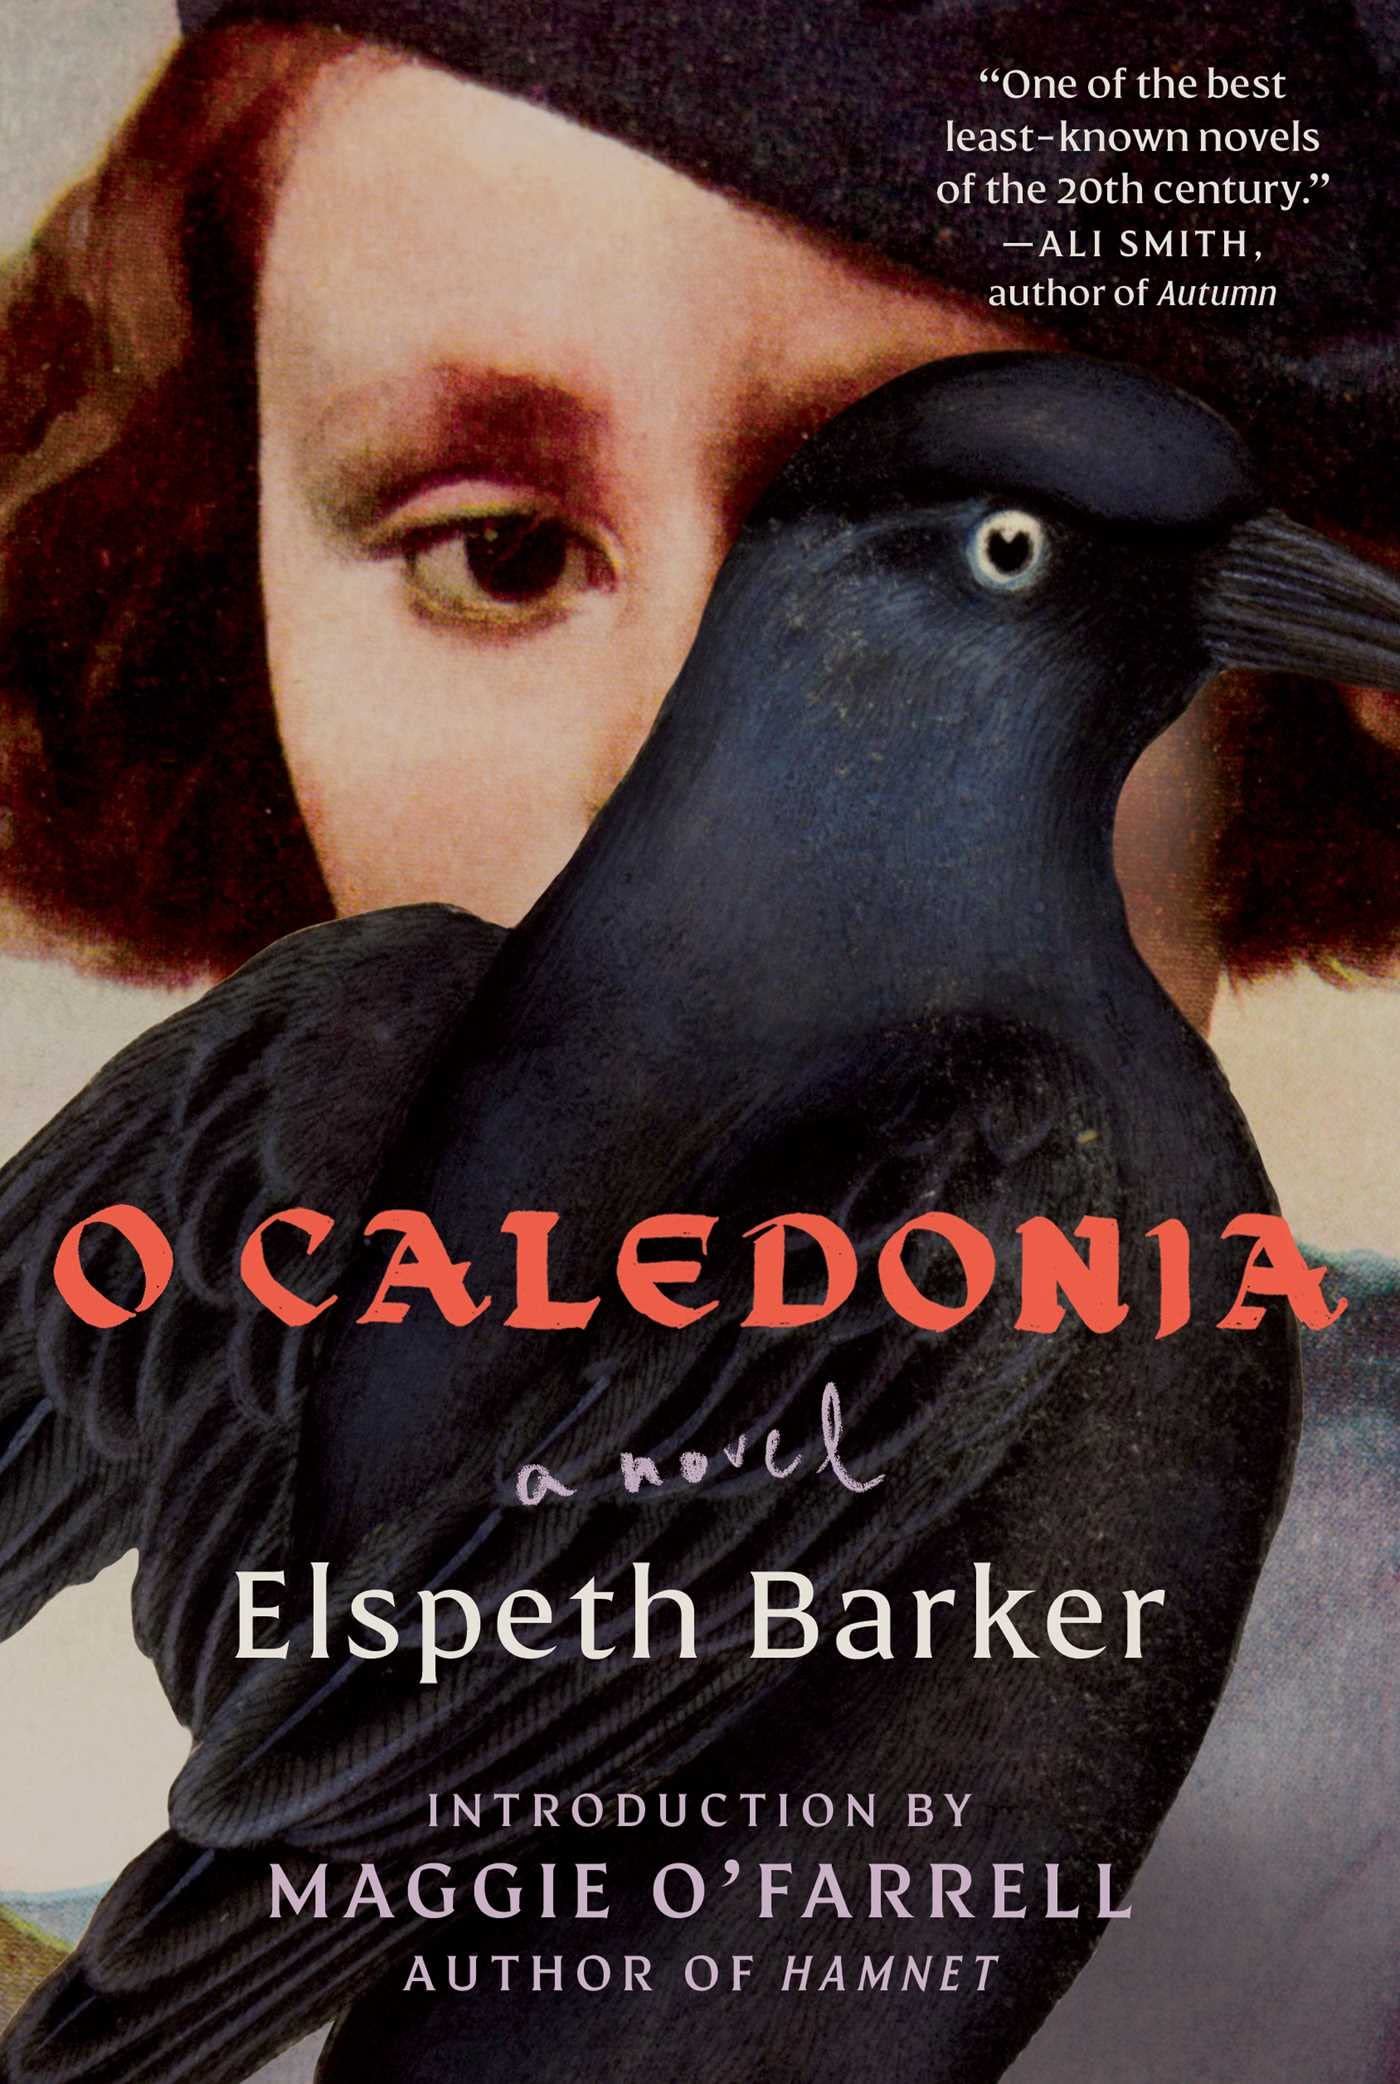 *NEW* O Caledonia by Elspeth Barker